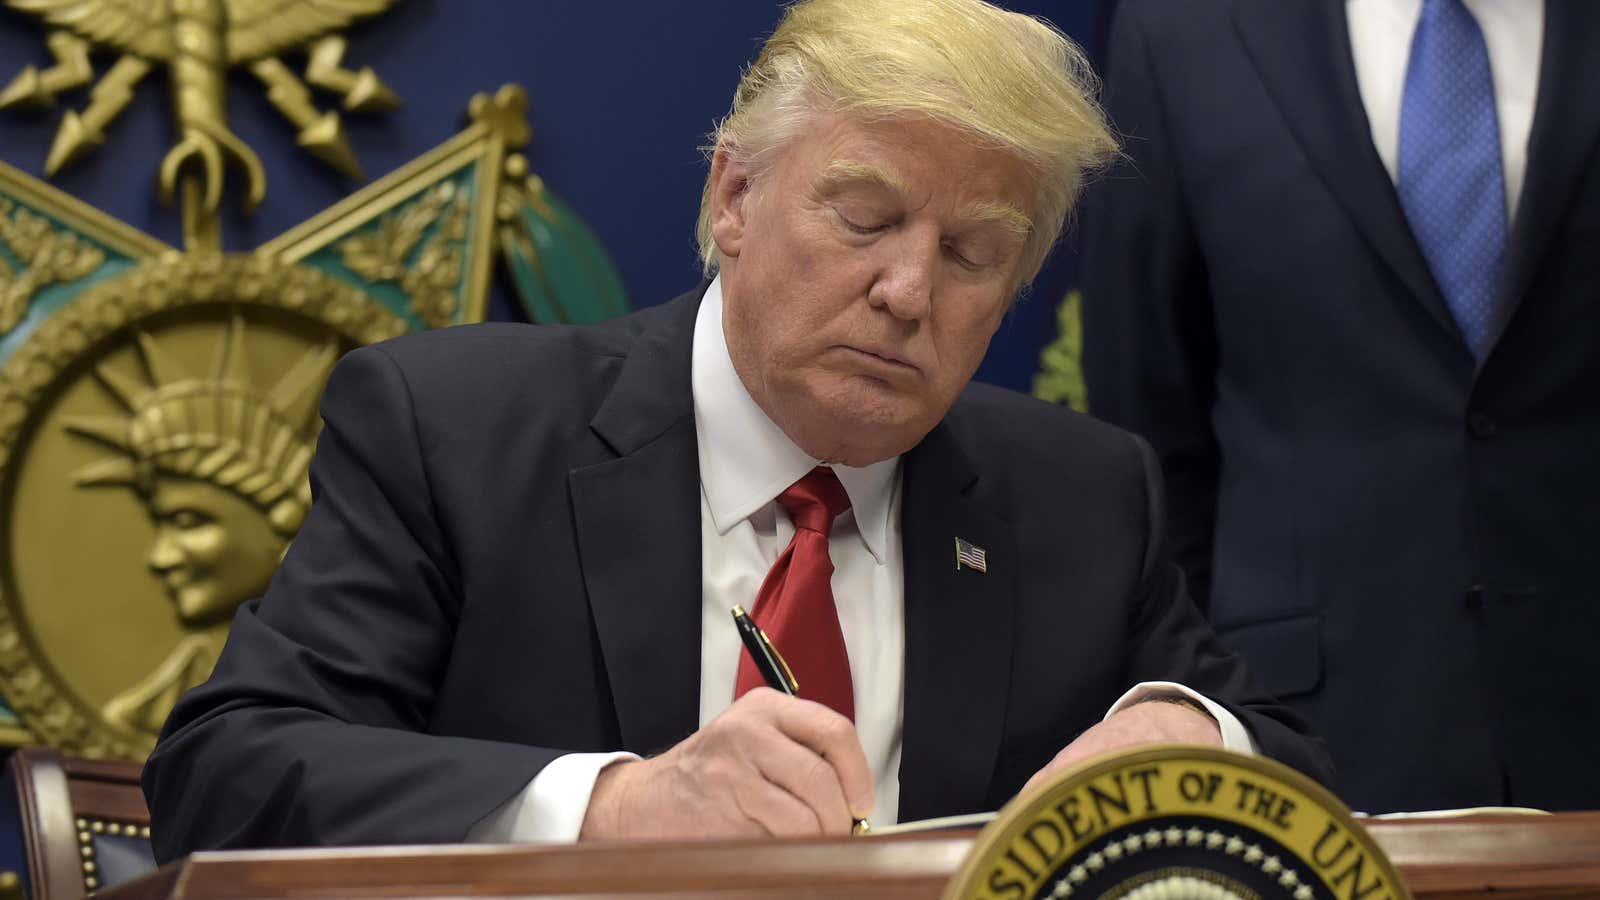 Trump signing the order.